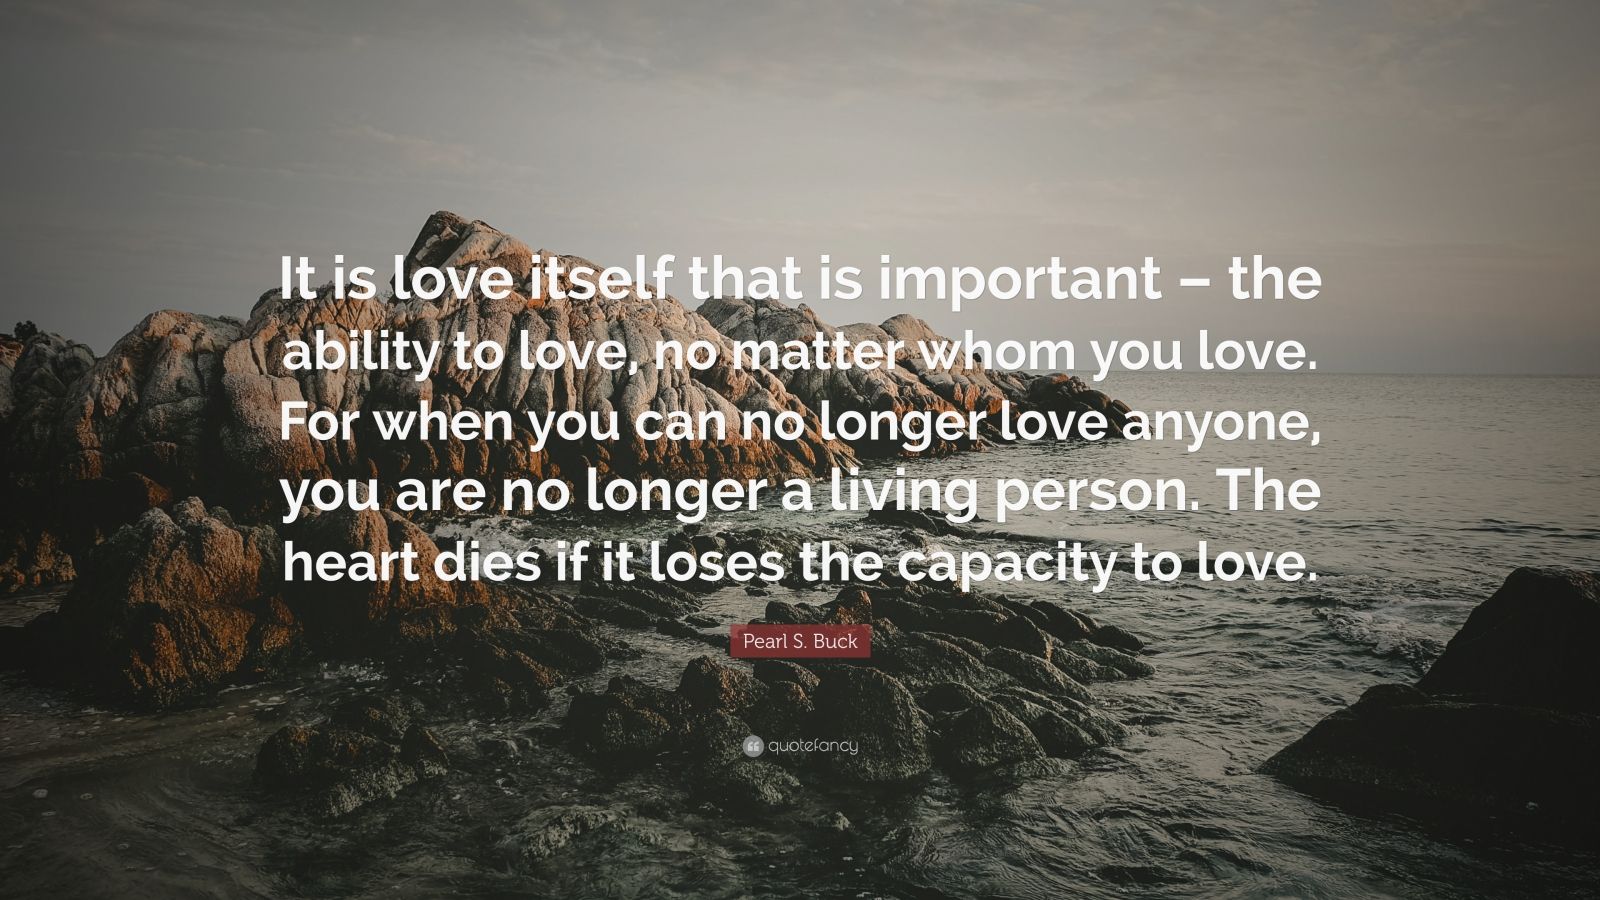 Pearl S. Buck Quote: “It is love itself that is important – the ability ...